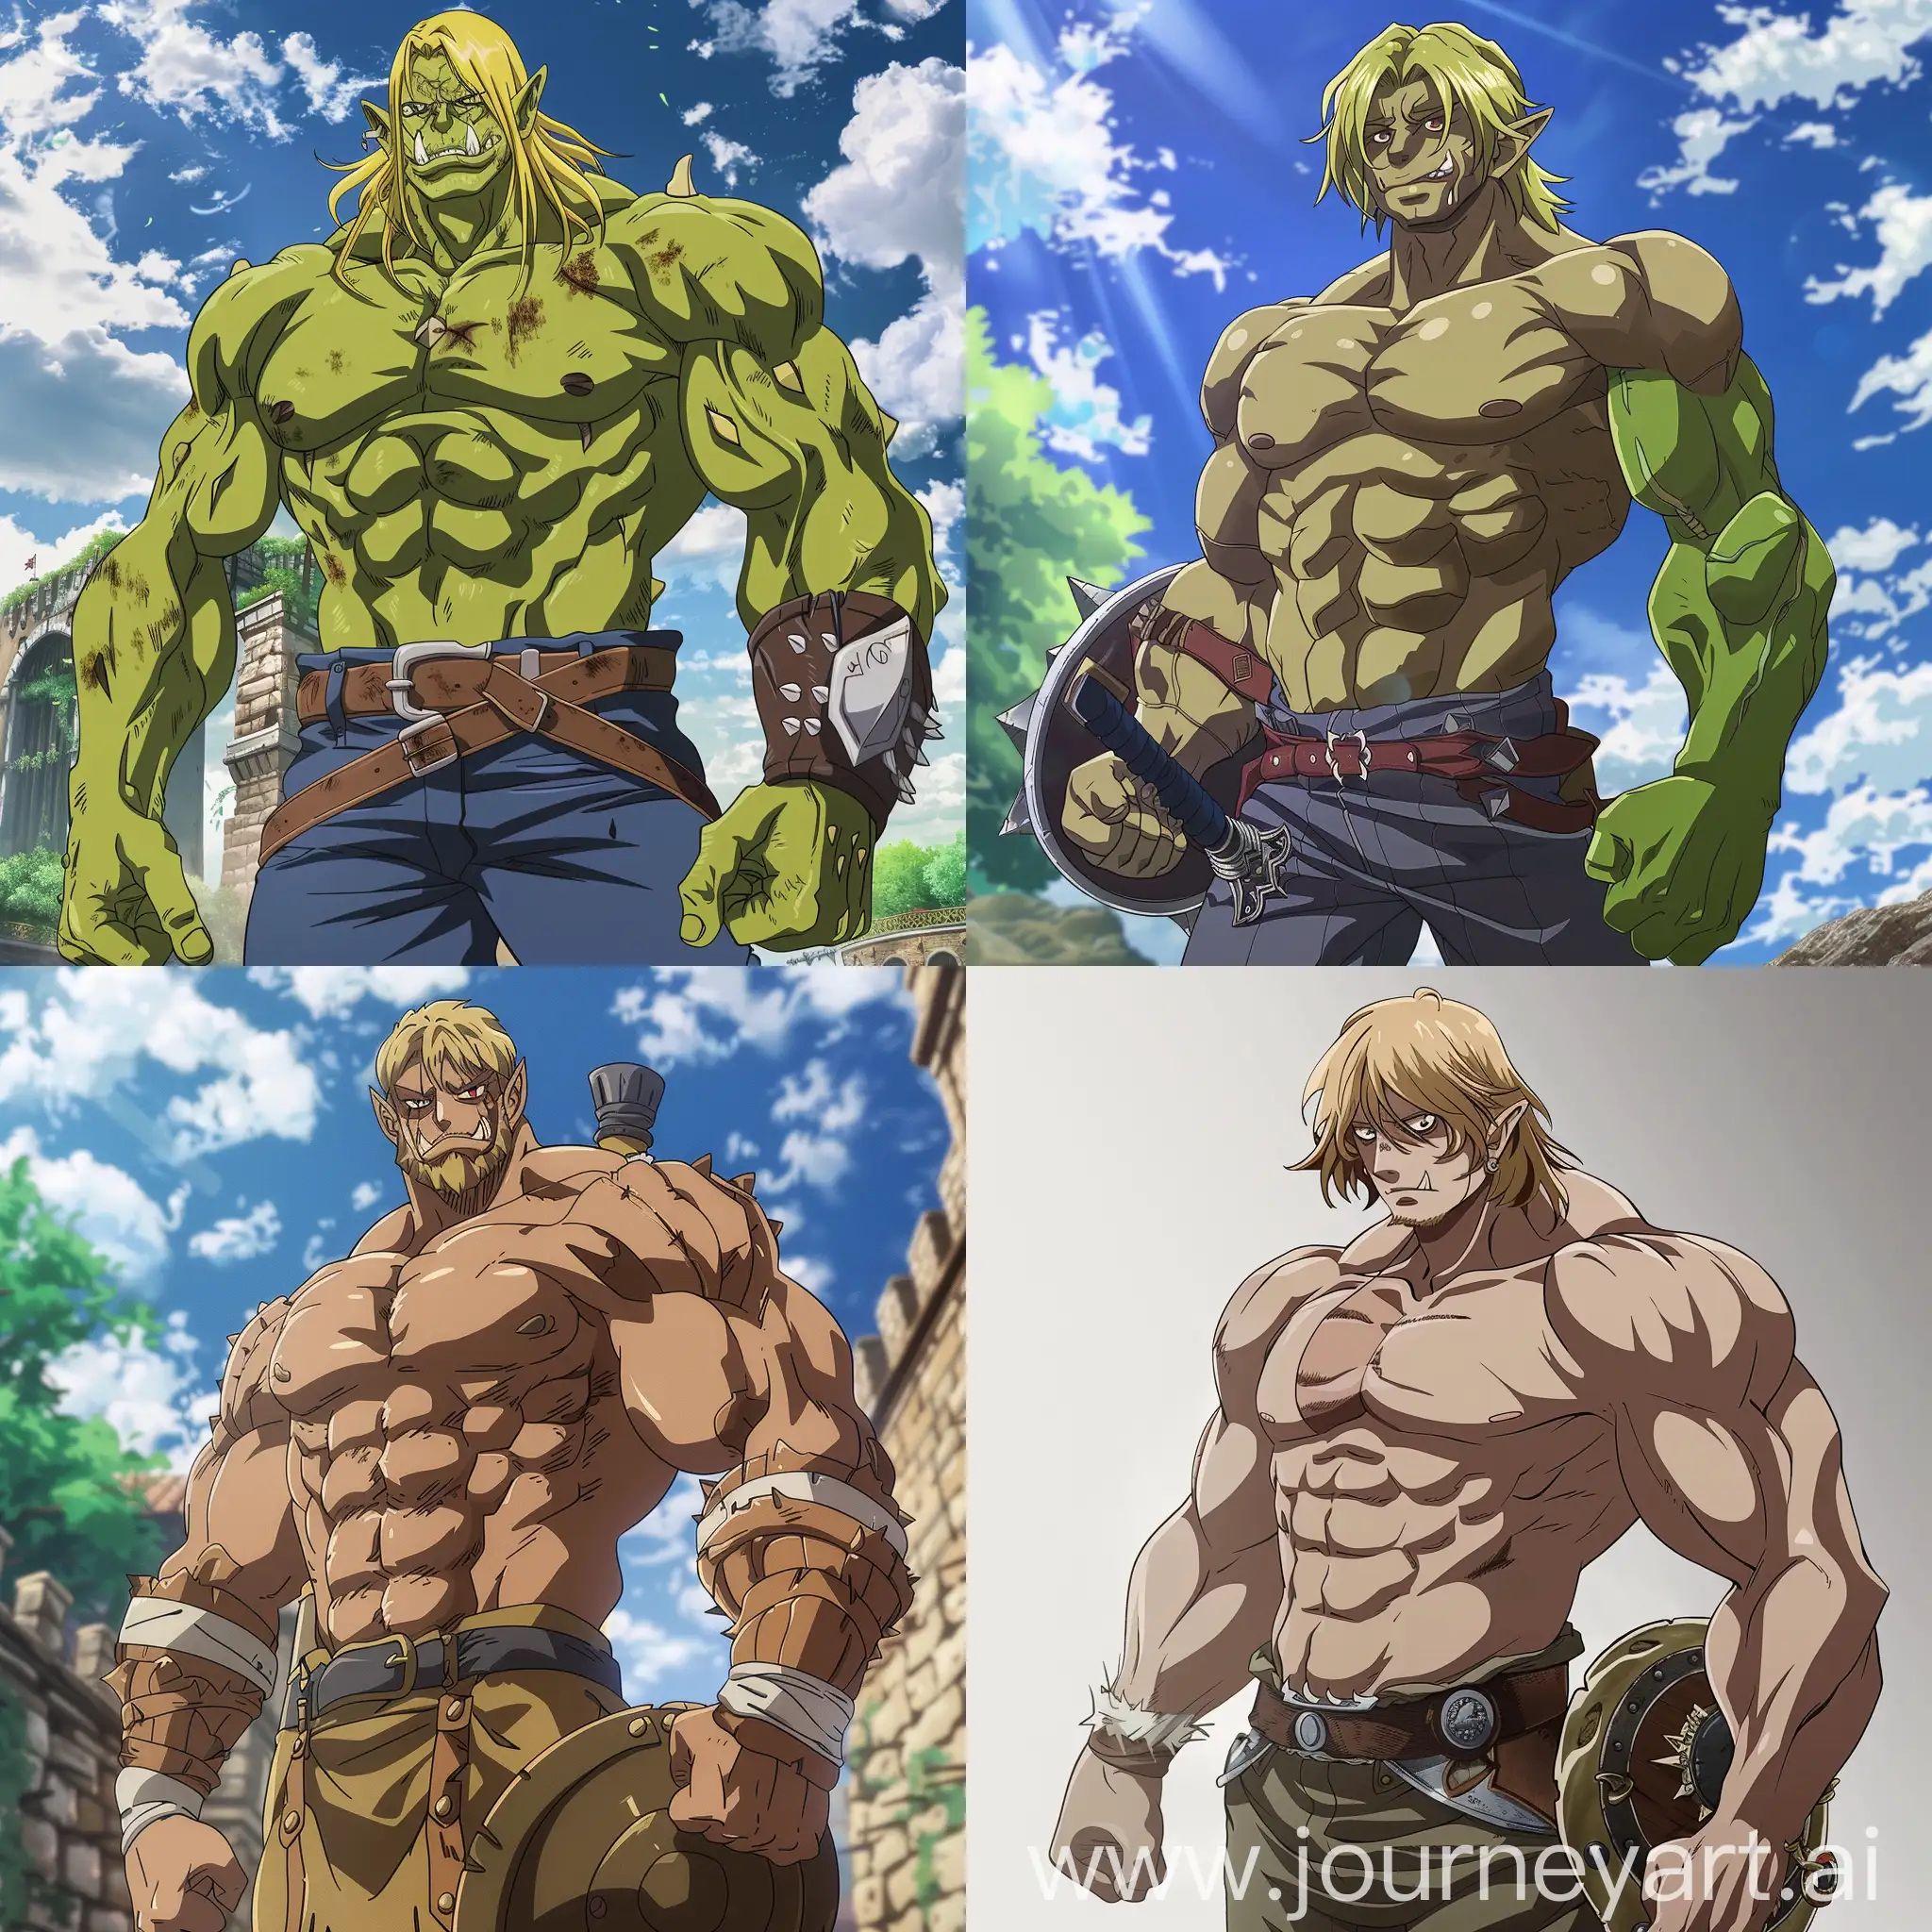 Mighty-Orc-Warrior-with-Buckler-Inspired-by-Escanor-from-Seven-Deadly-Sins